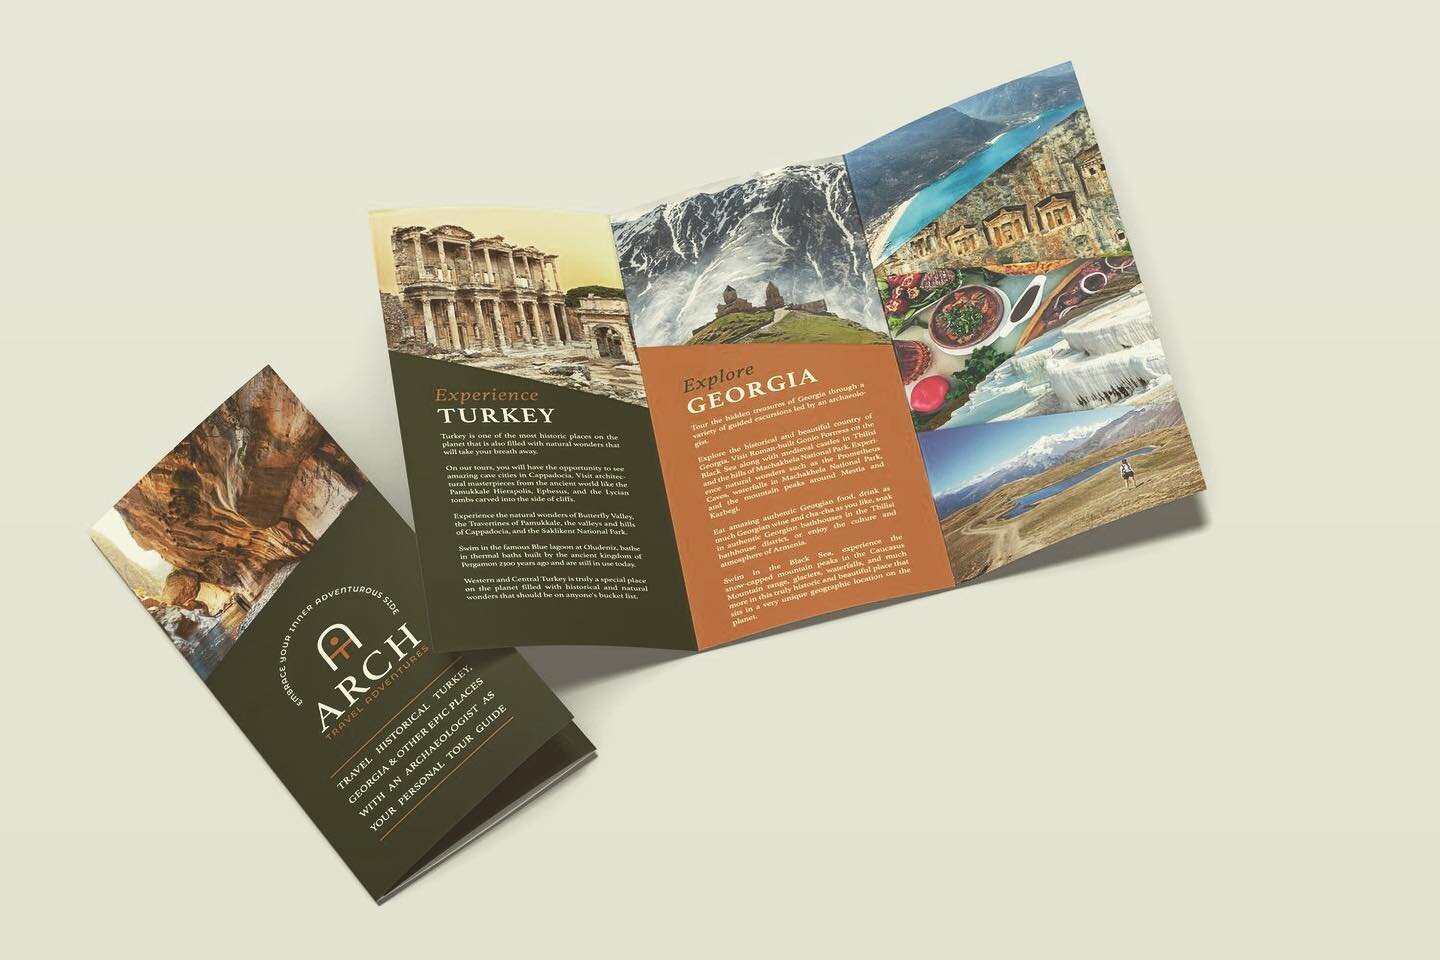 Check out these Epic brochures that we did for Arch Travel Adventures! 

#brochuredesign #epicdesign #travelbrochure #travelagency